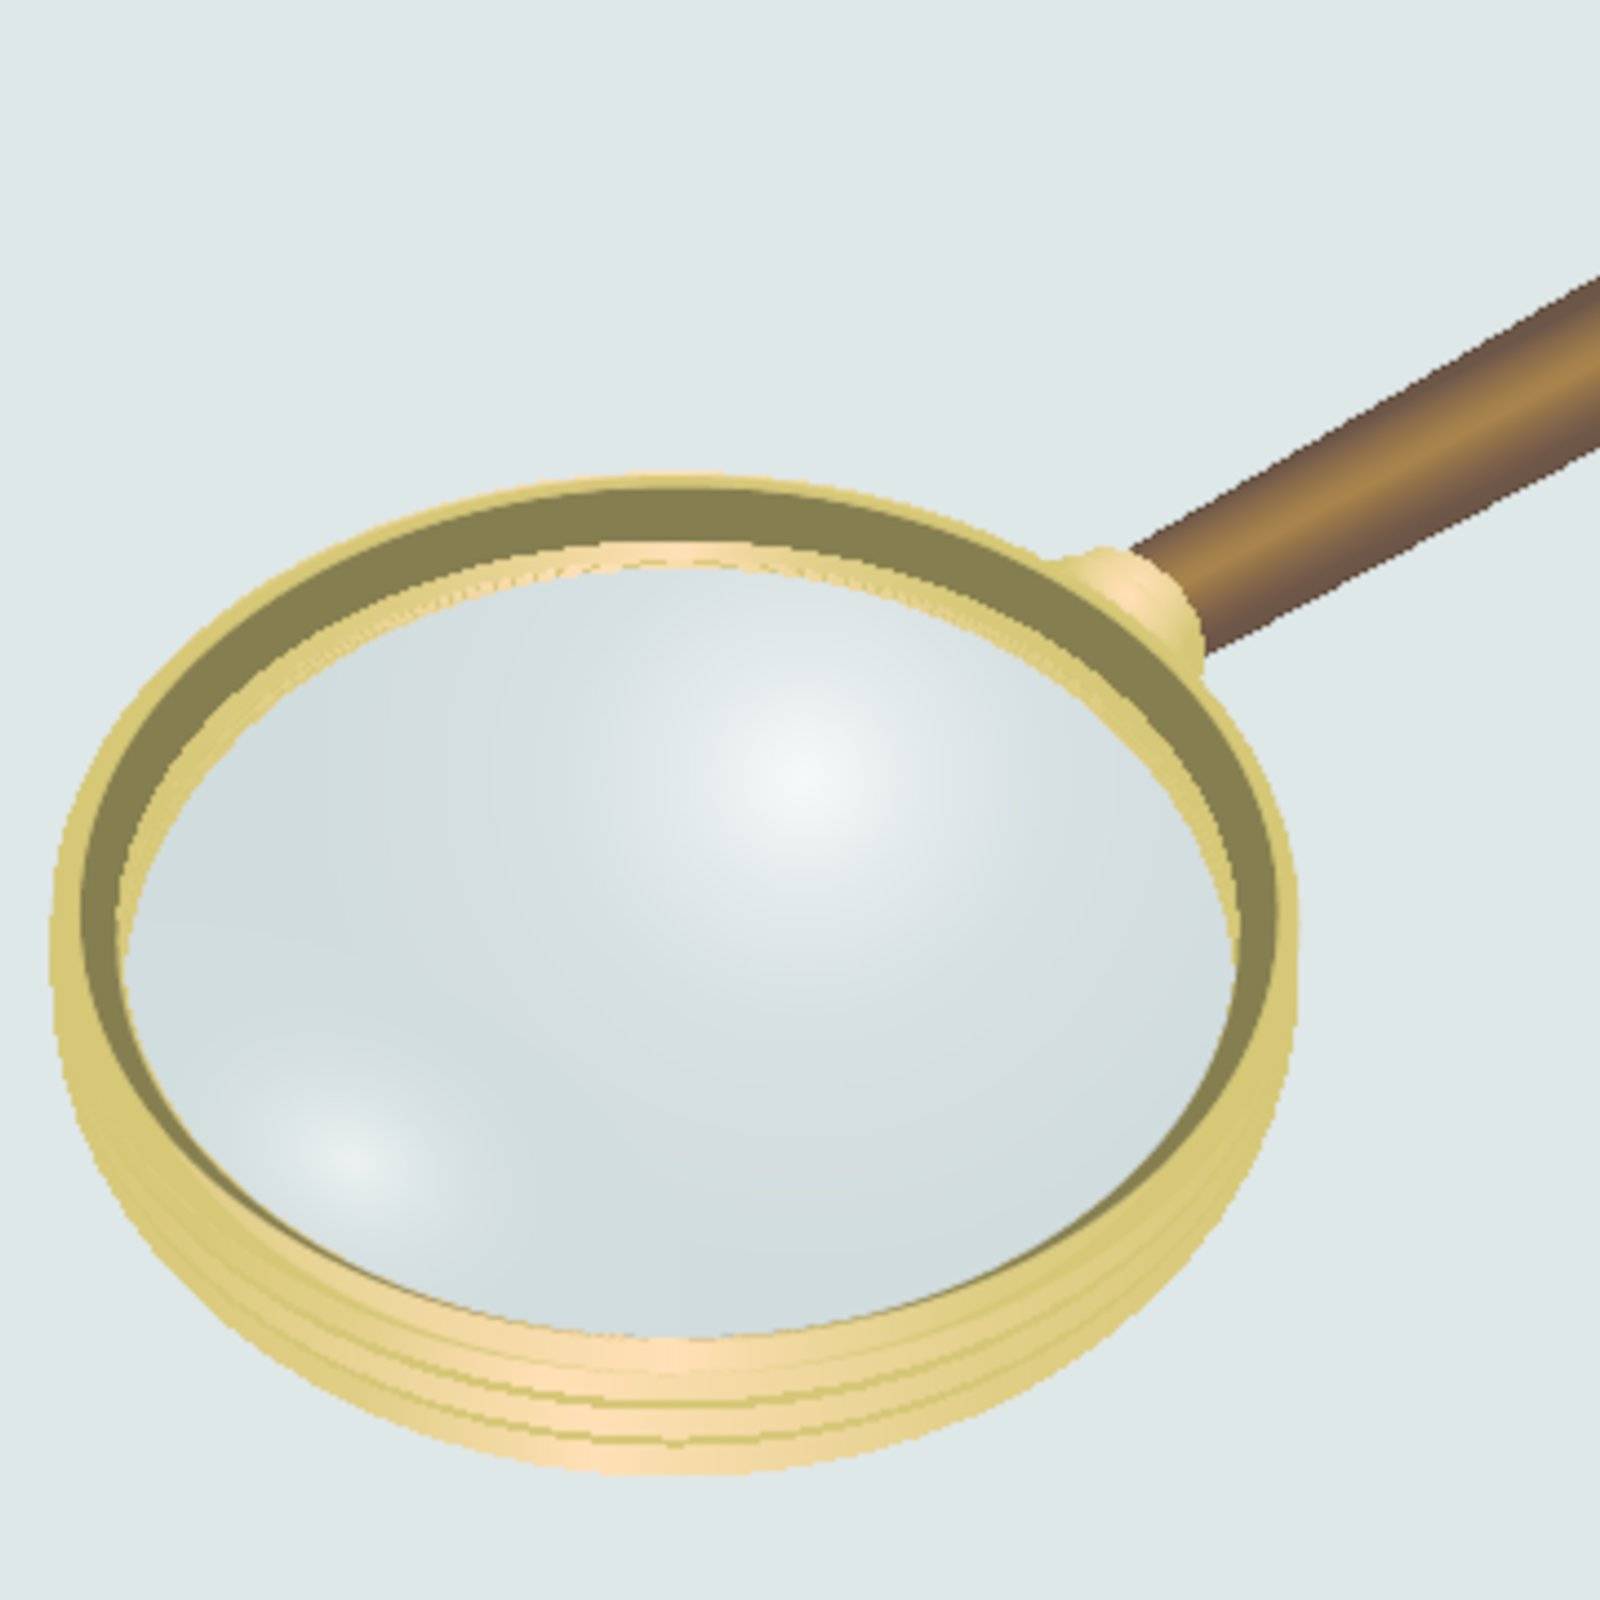 Antique magnifying glass in a frame of yellow materialla. Vector illustration.